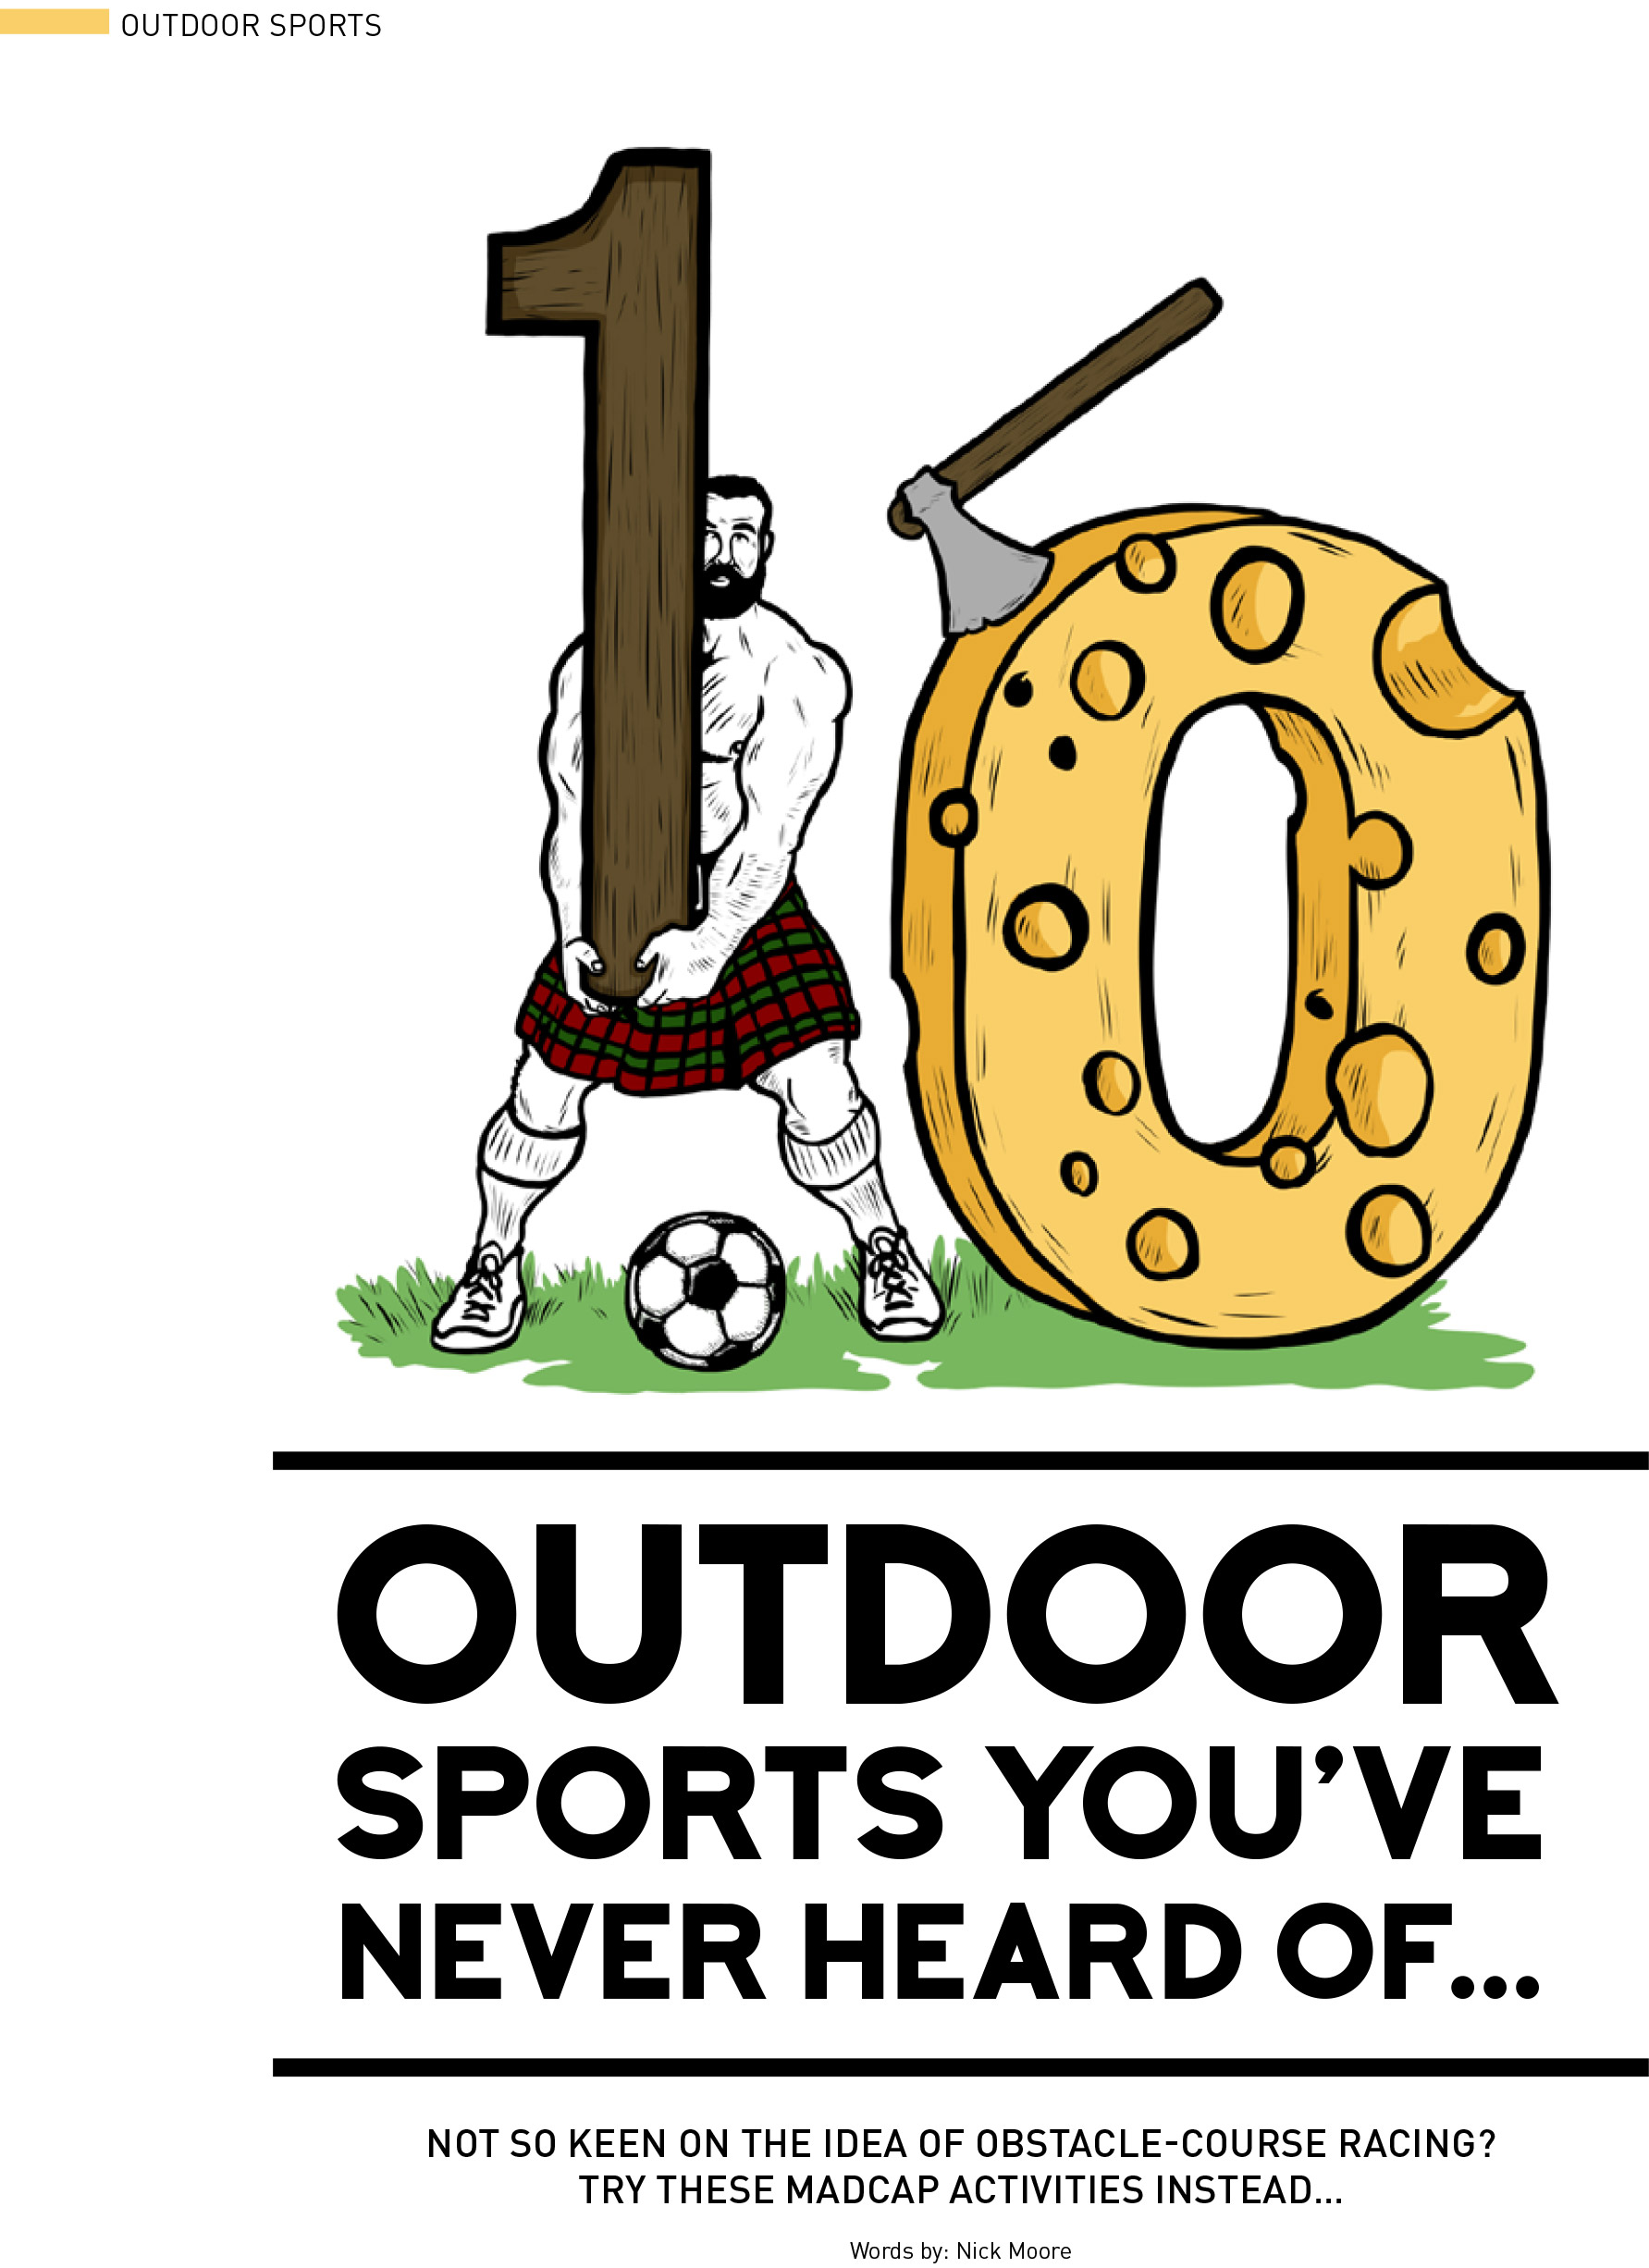 Outdoor sports, bestfit issue 12